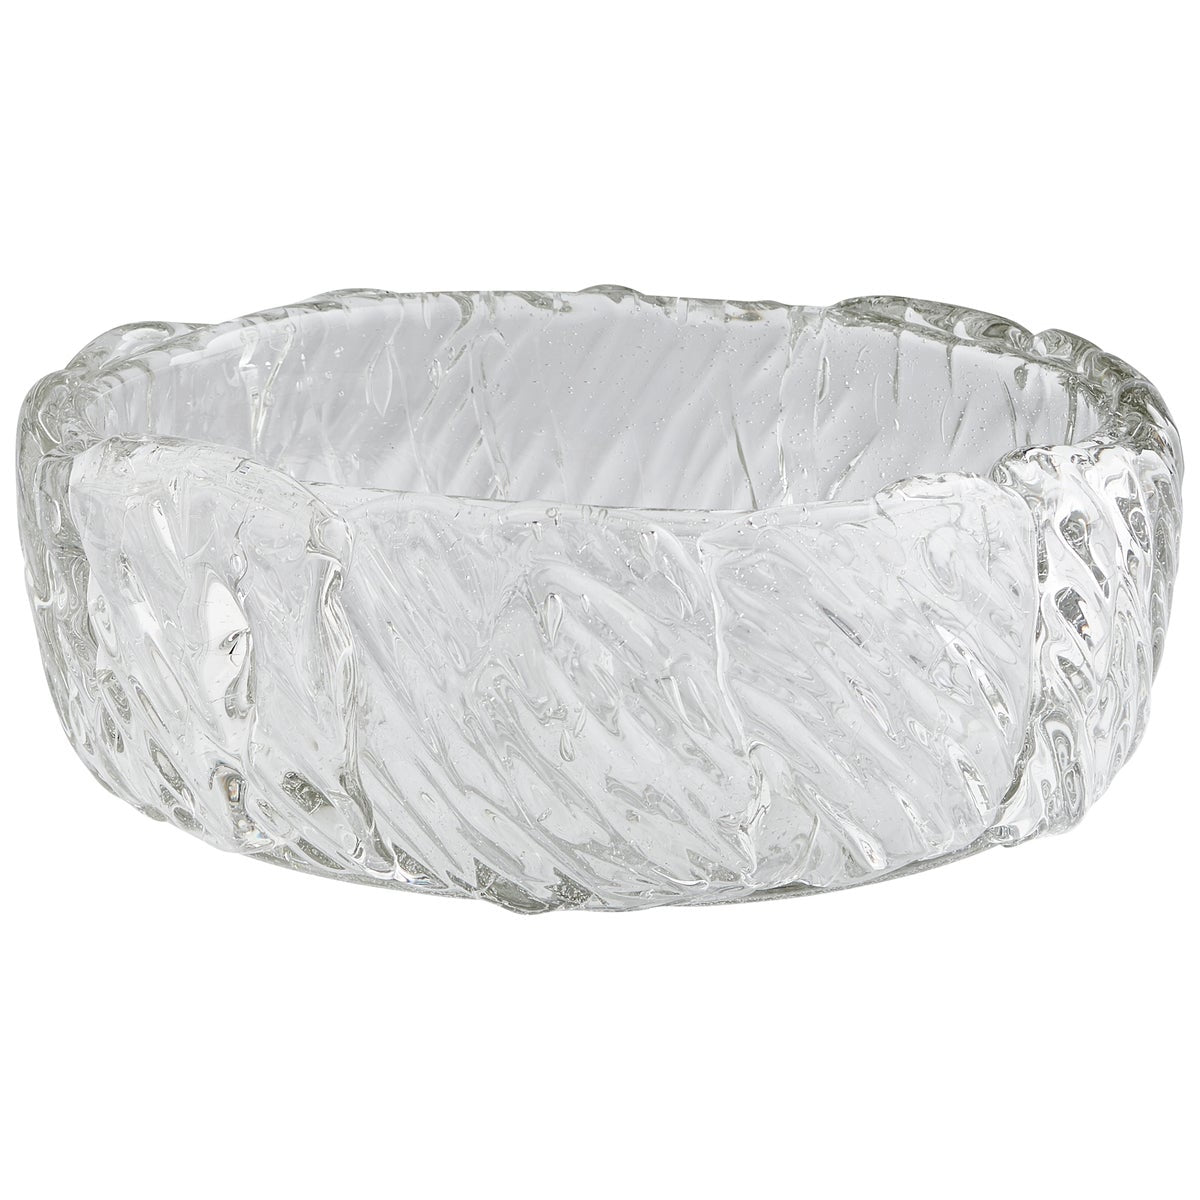 Clear Clearly Thorough Bowl